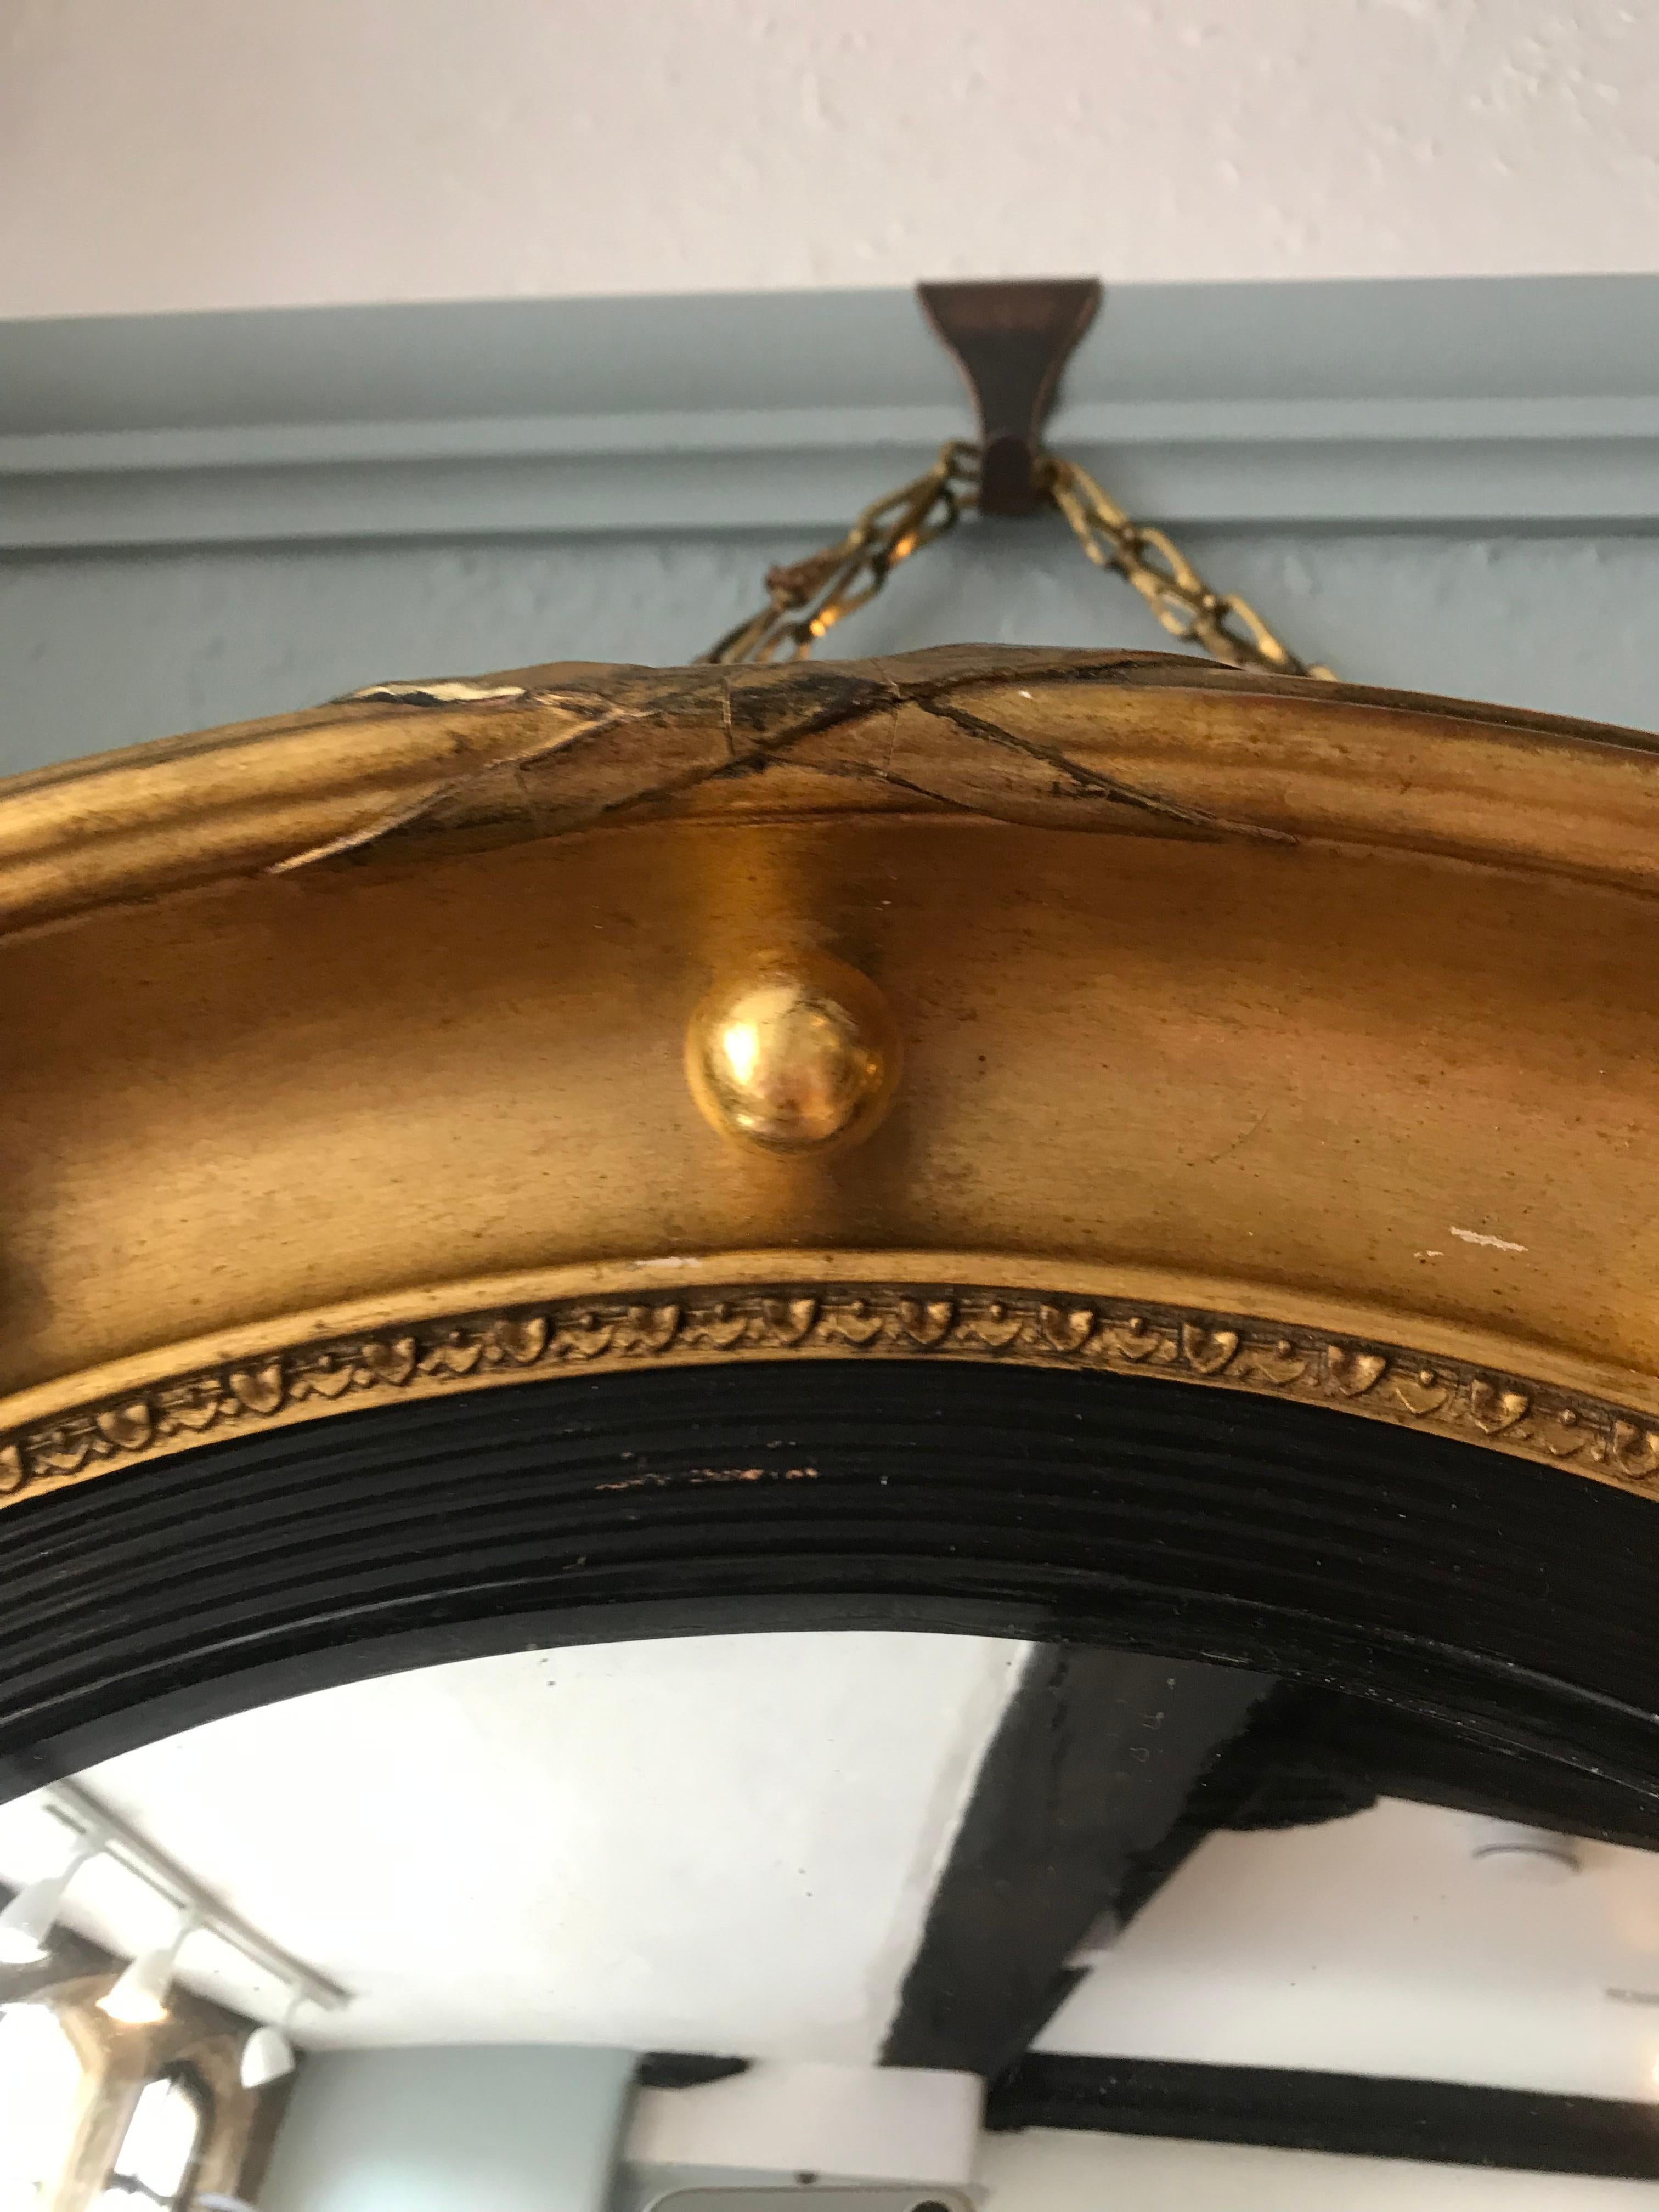 19th-century gilt convex mirror, the inner slip is reeded, ebonized and adorned with turned water gilded balls around the concave circumference. This mirror would add country house glamour to any room.